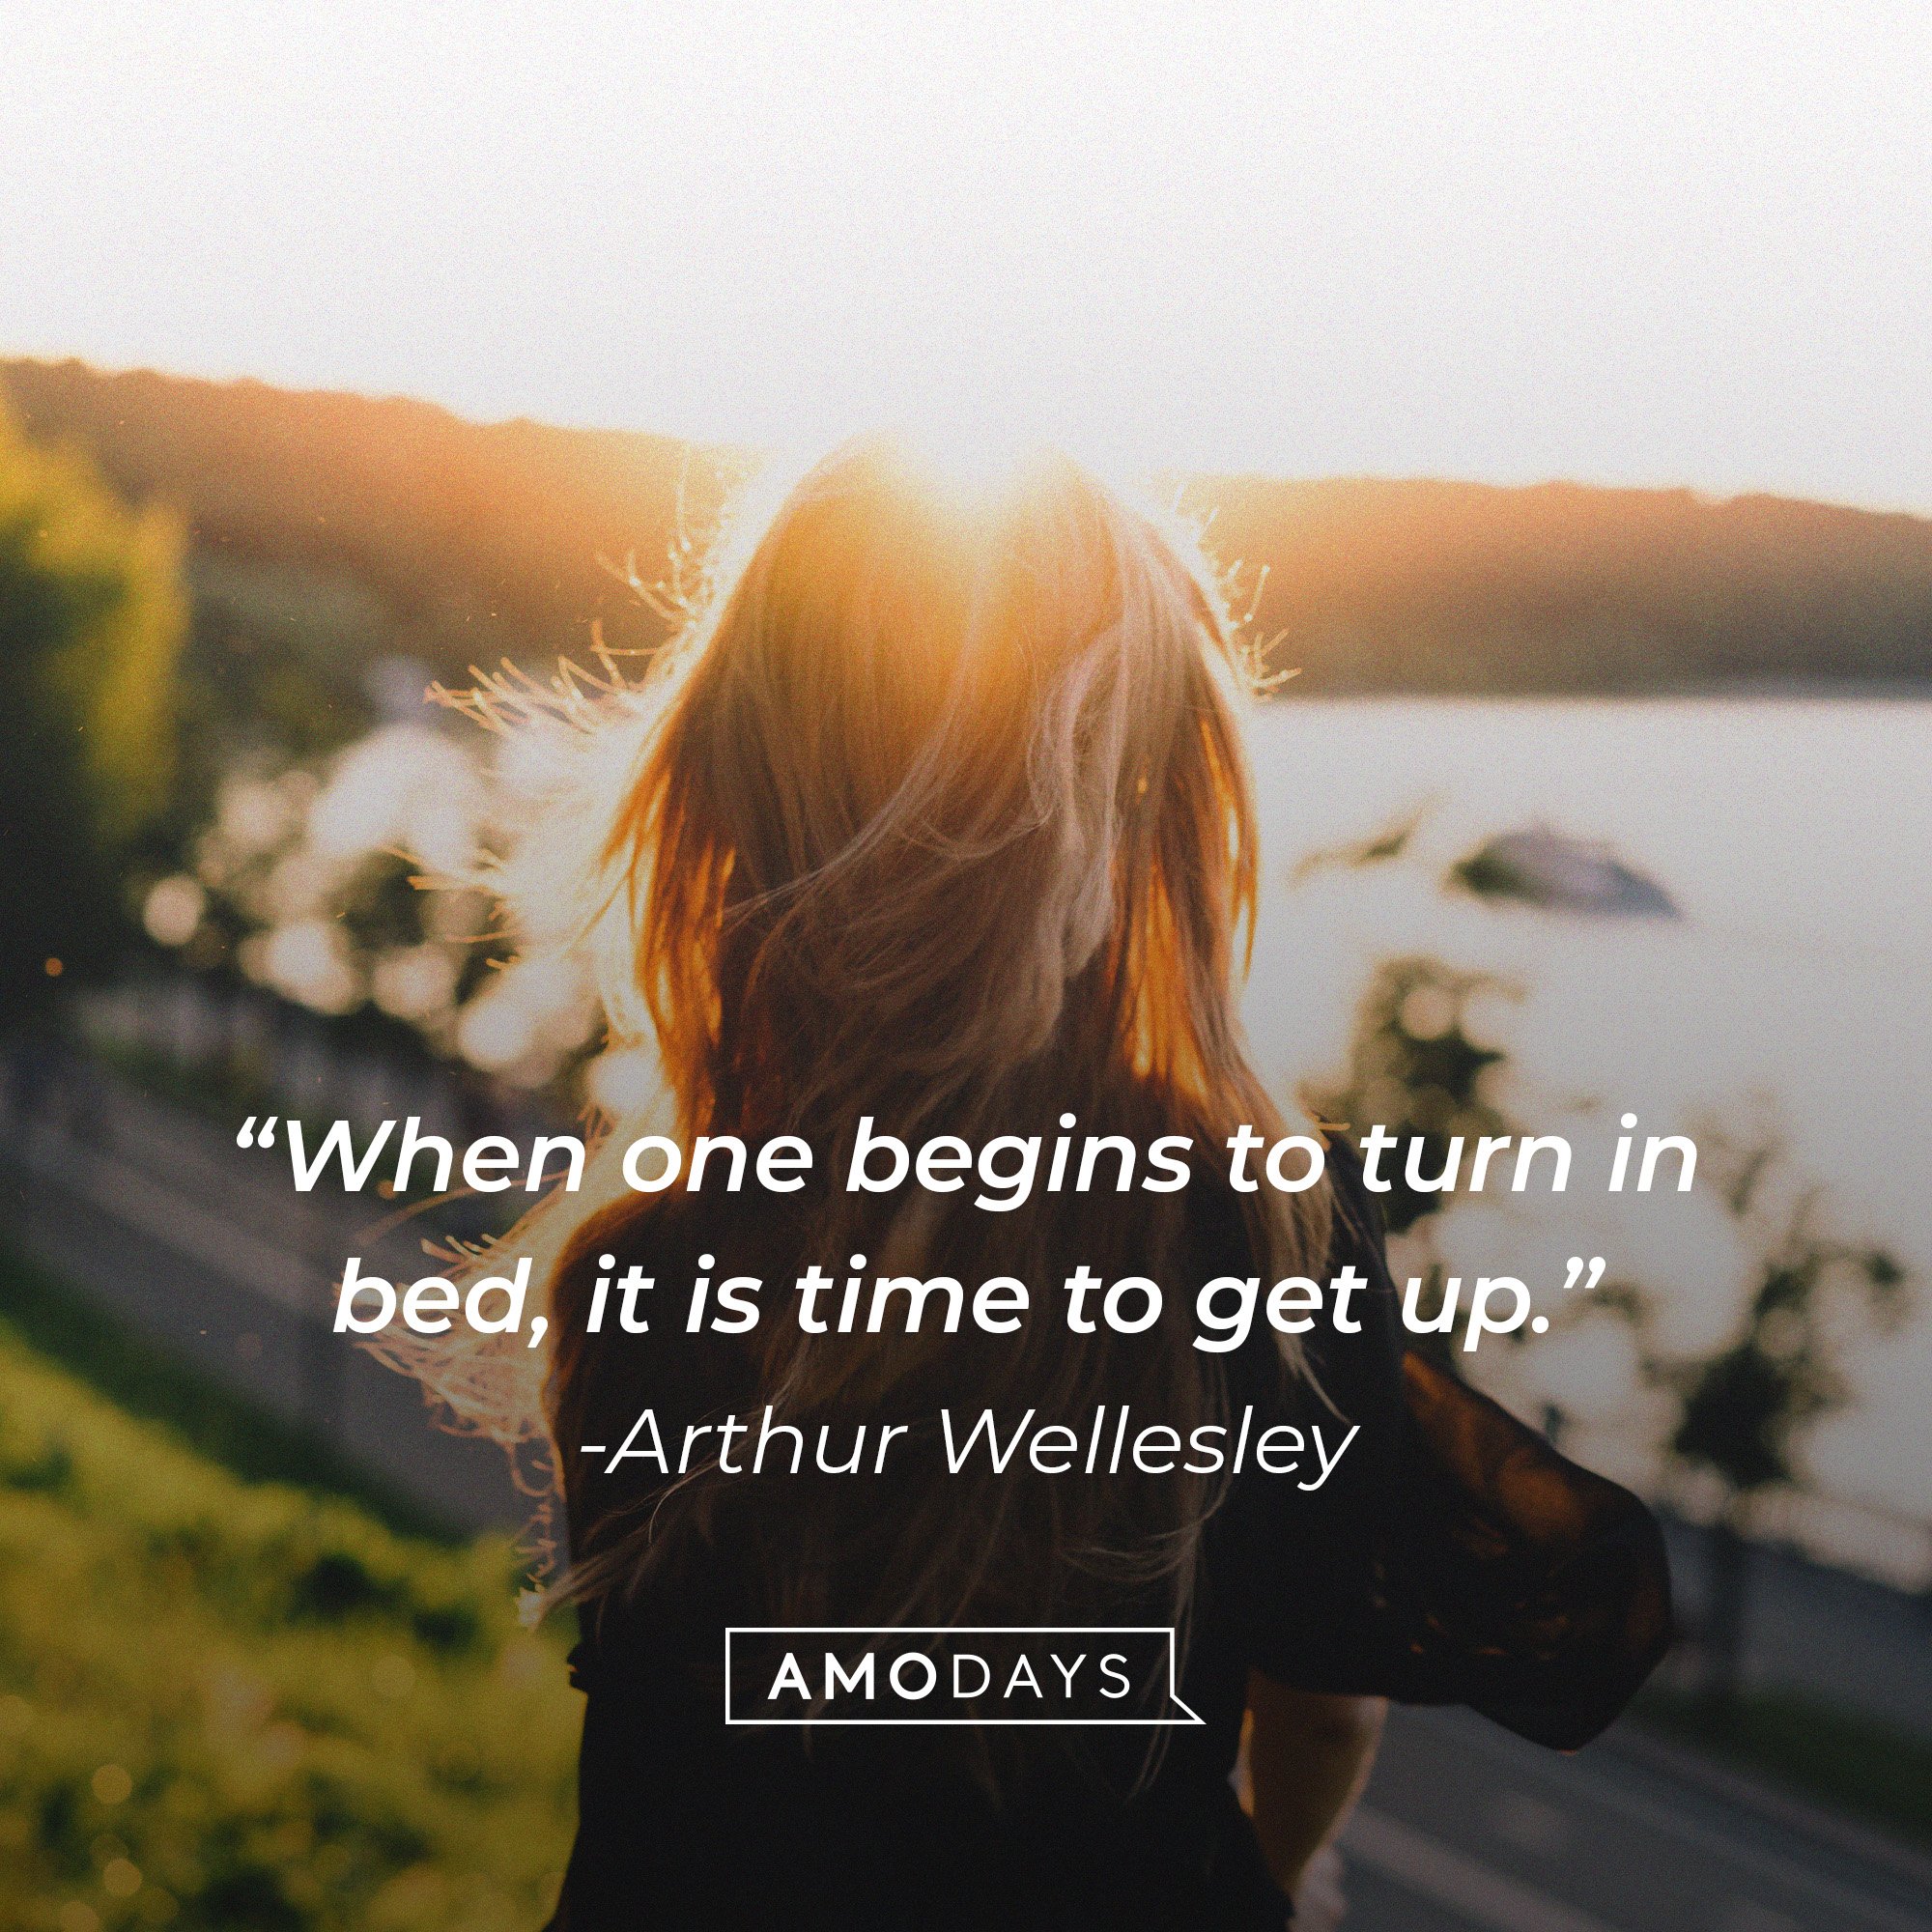 Arthur Wellesley's quote: “When one begins to turn in bed, it is time to get up." | Image: AmoDays 